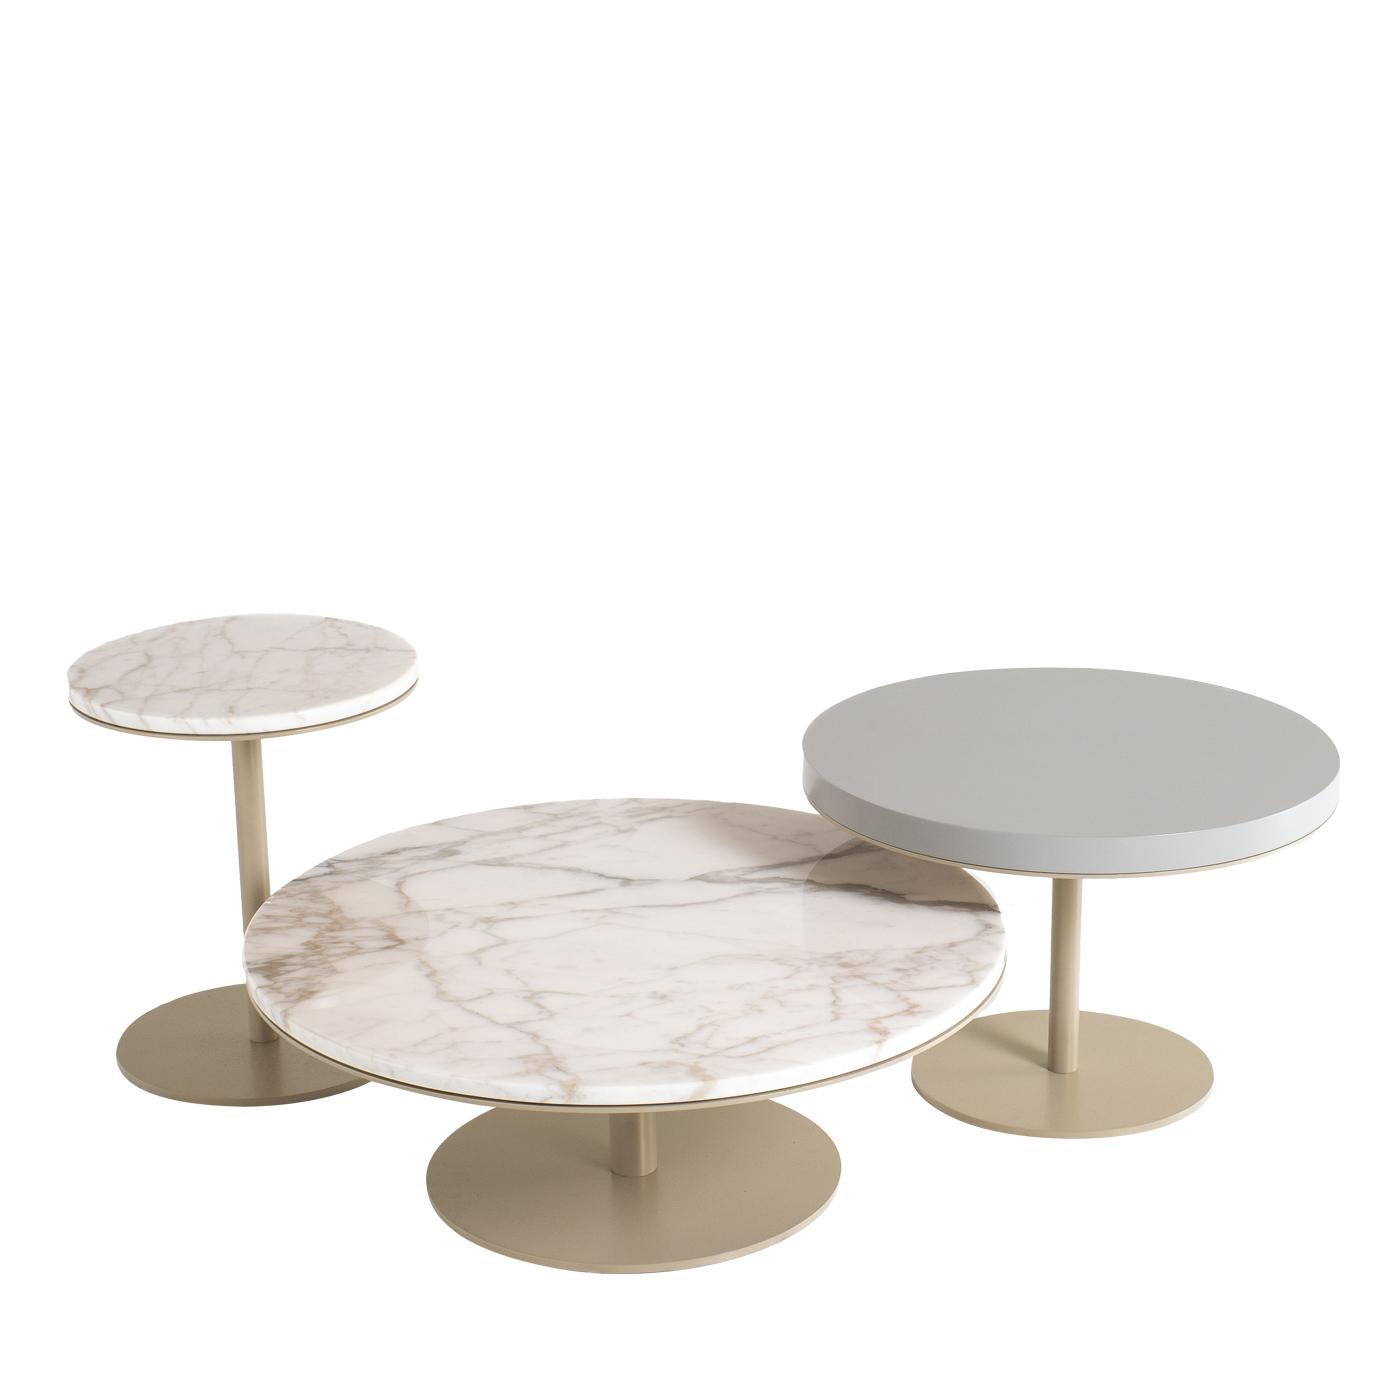 Create an original space to serve drinks and snacks in a contemporary lounge area with this set of three round serving tables. Fully customizable, the tables shown here feature a matte gold base, two marble tops and one lacquered wood top. The